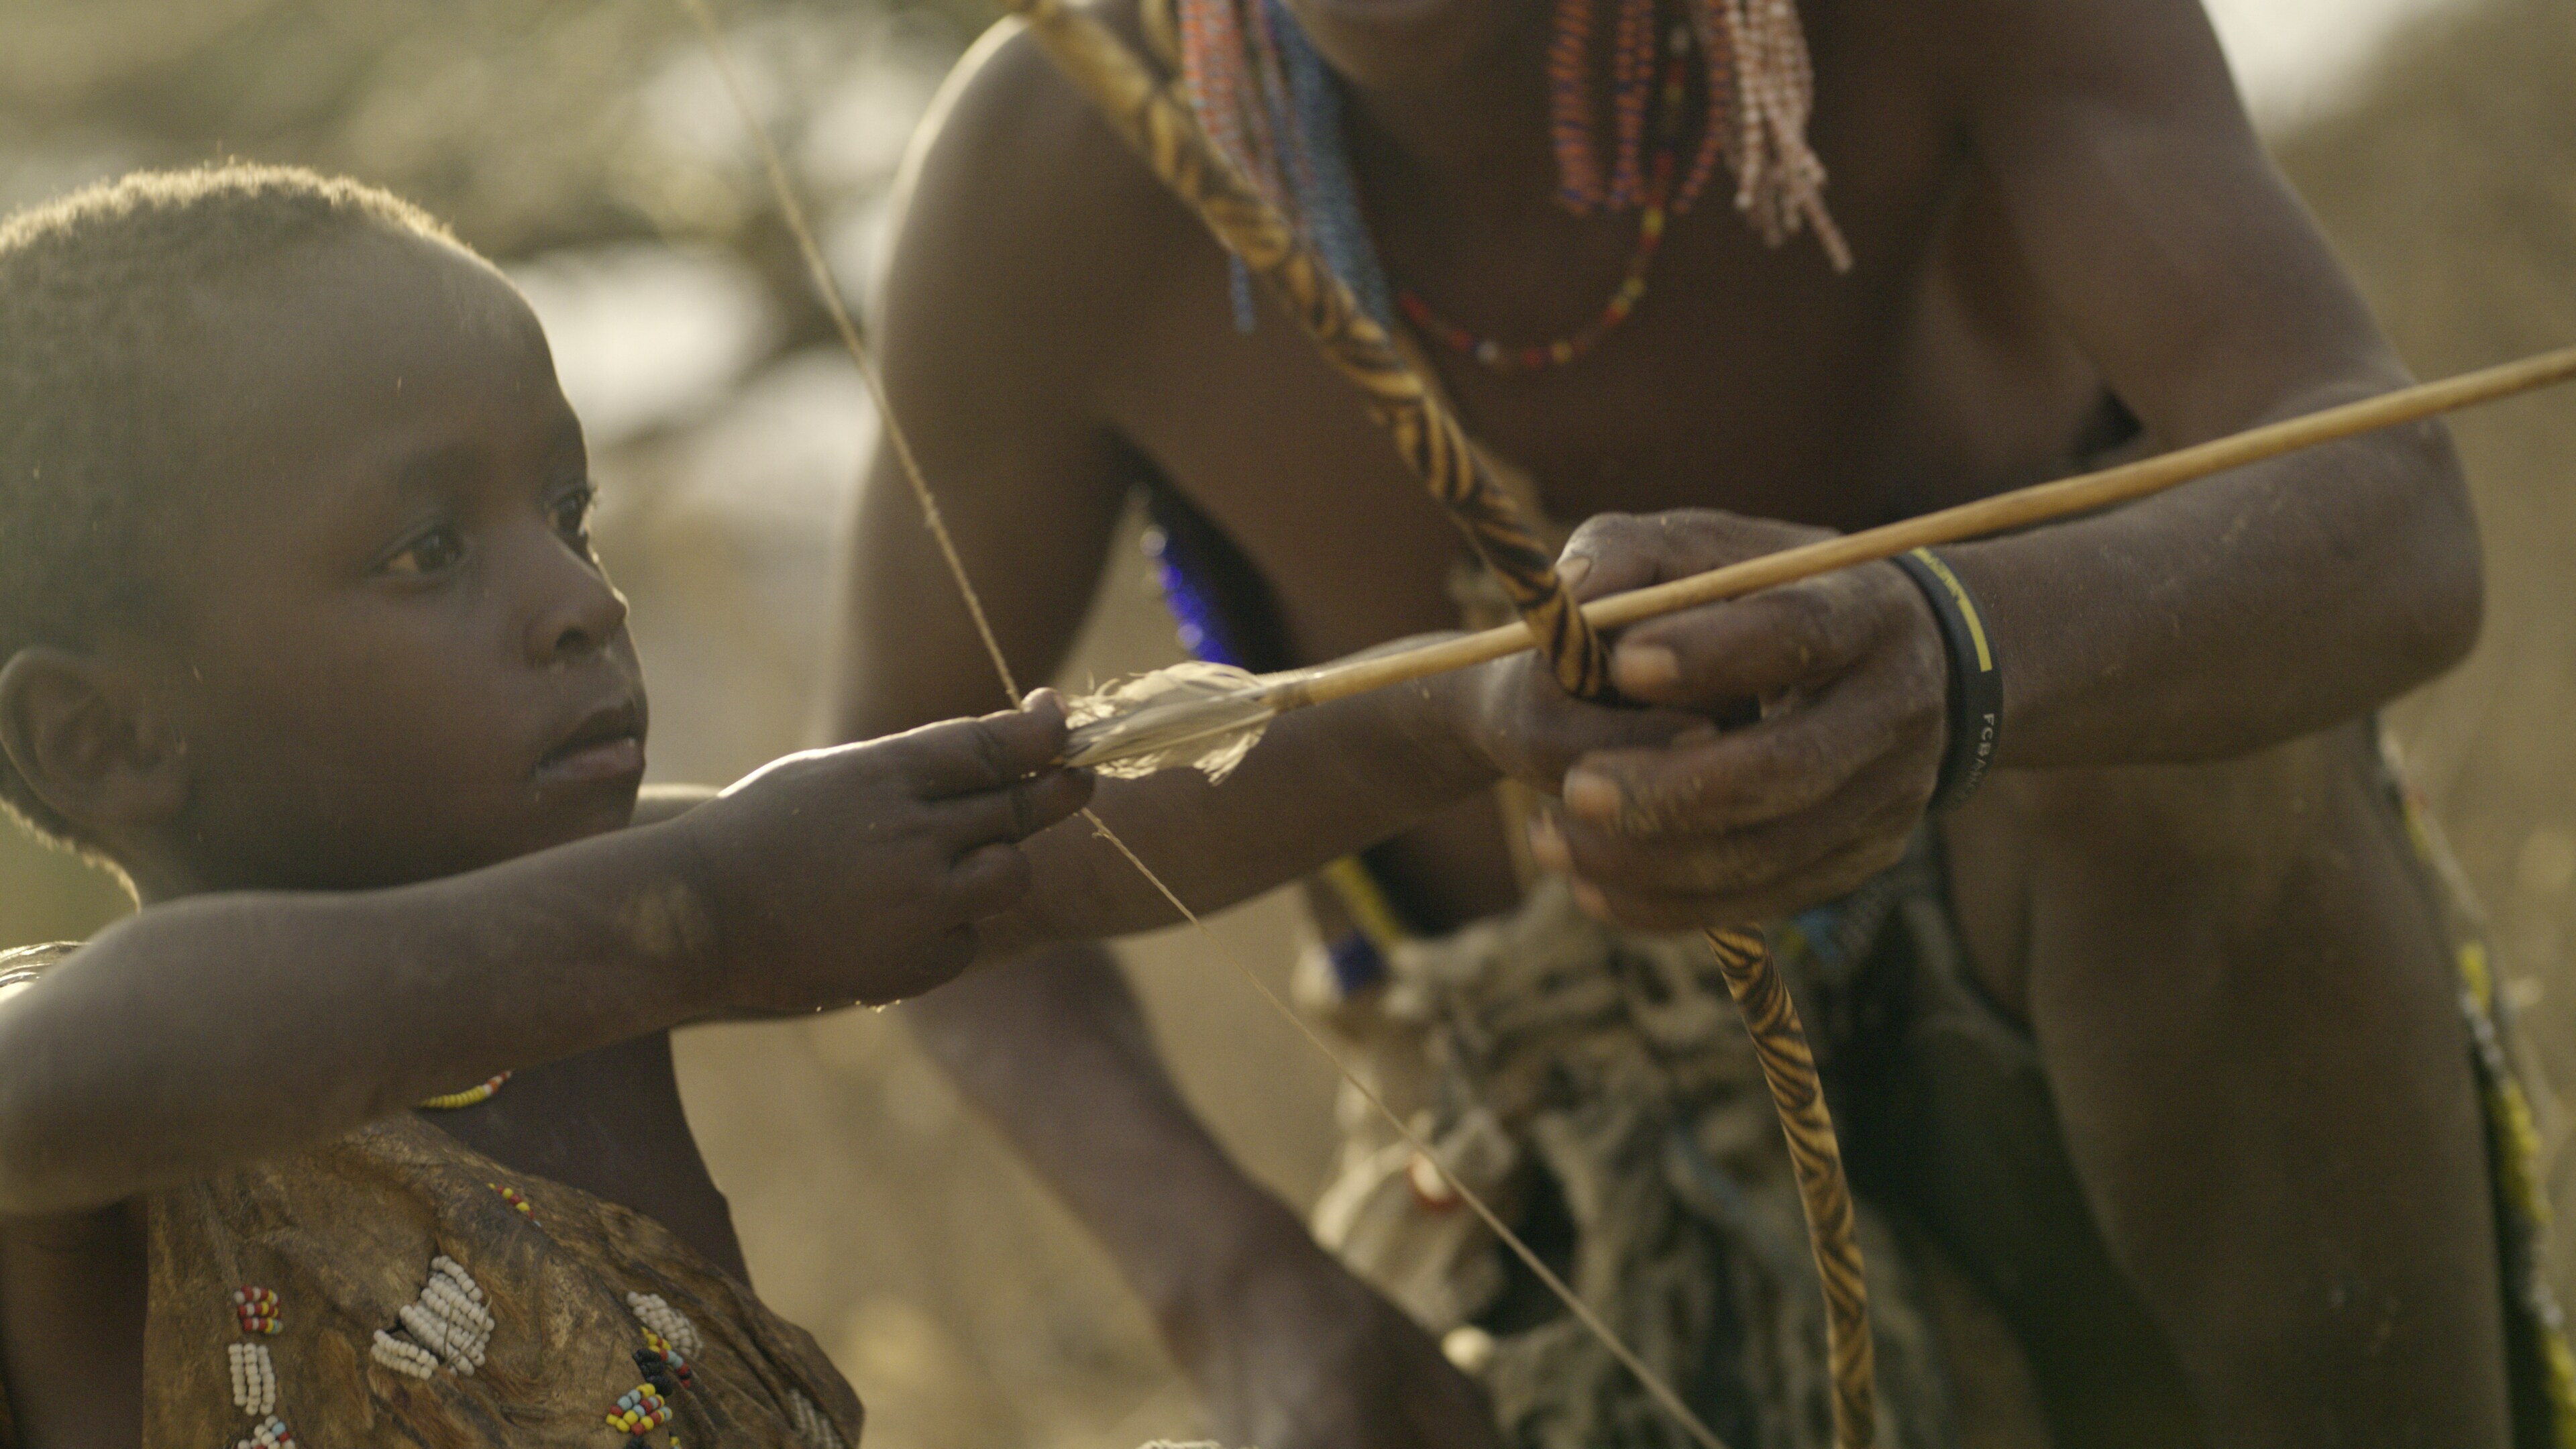 A Hadza tribe child shoots a bow and arrow. (National Geographic for Disney+)